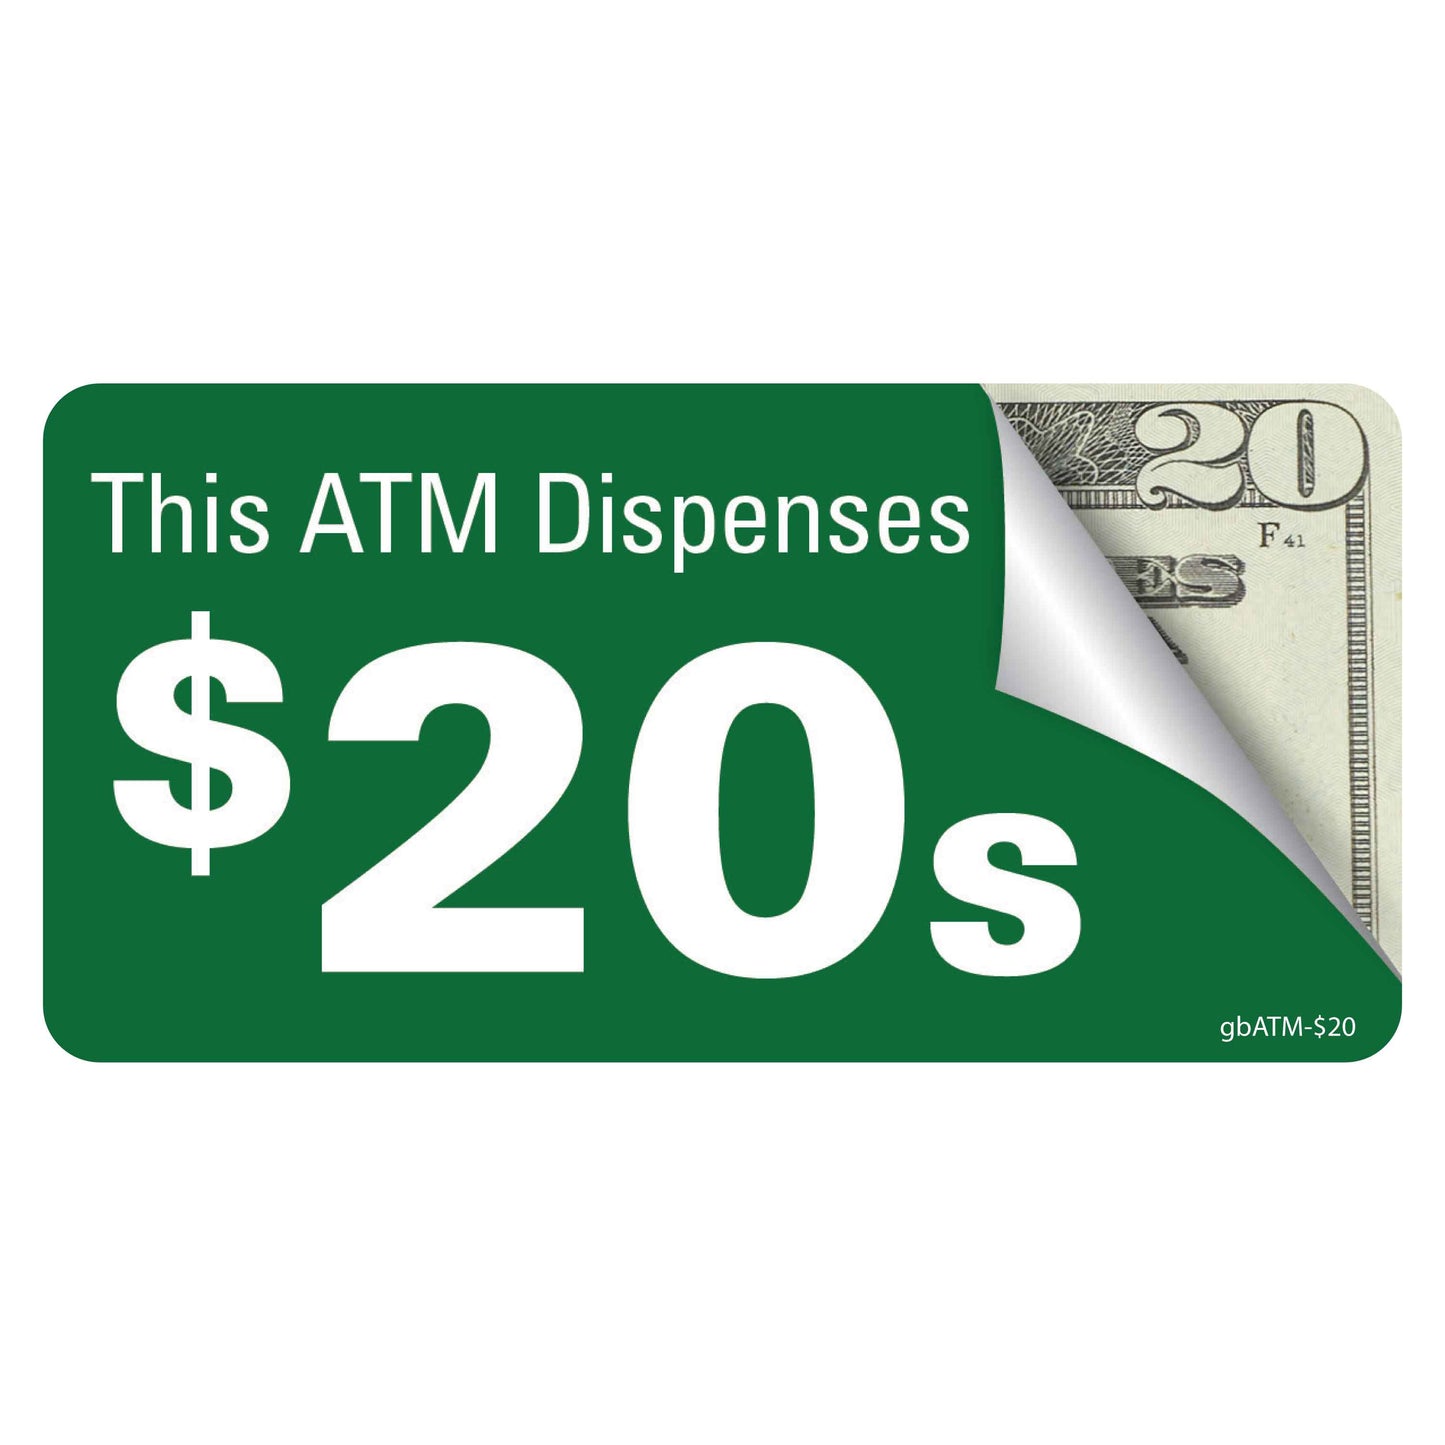 Pro ATM Dispense $20's Decal. 4 inches by 2 inches in size. 